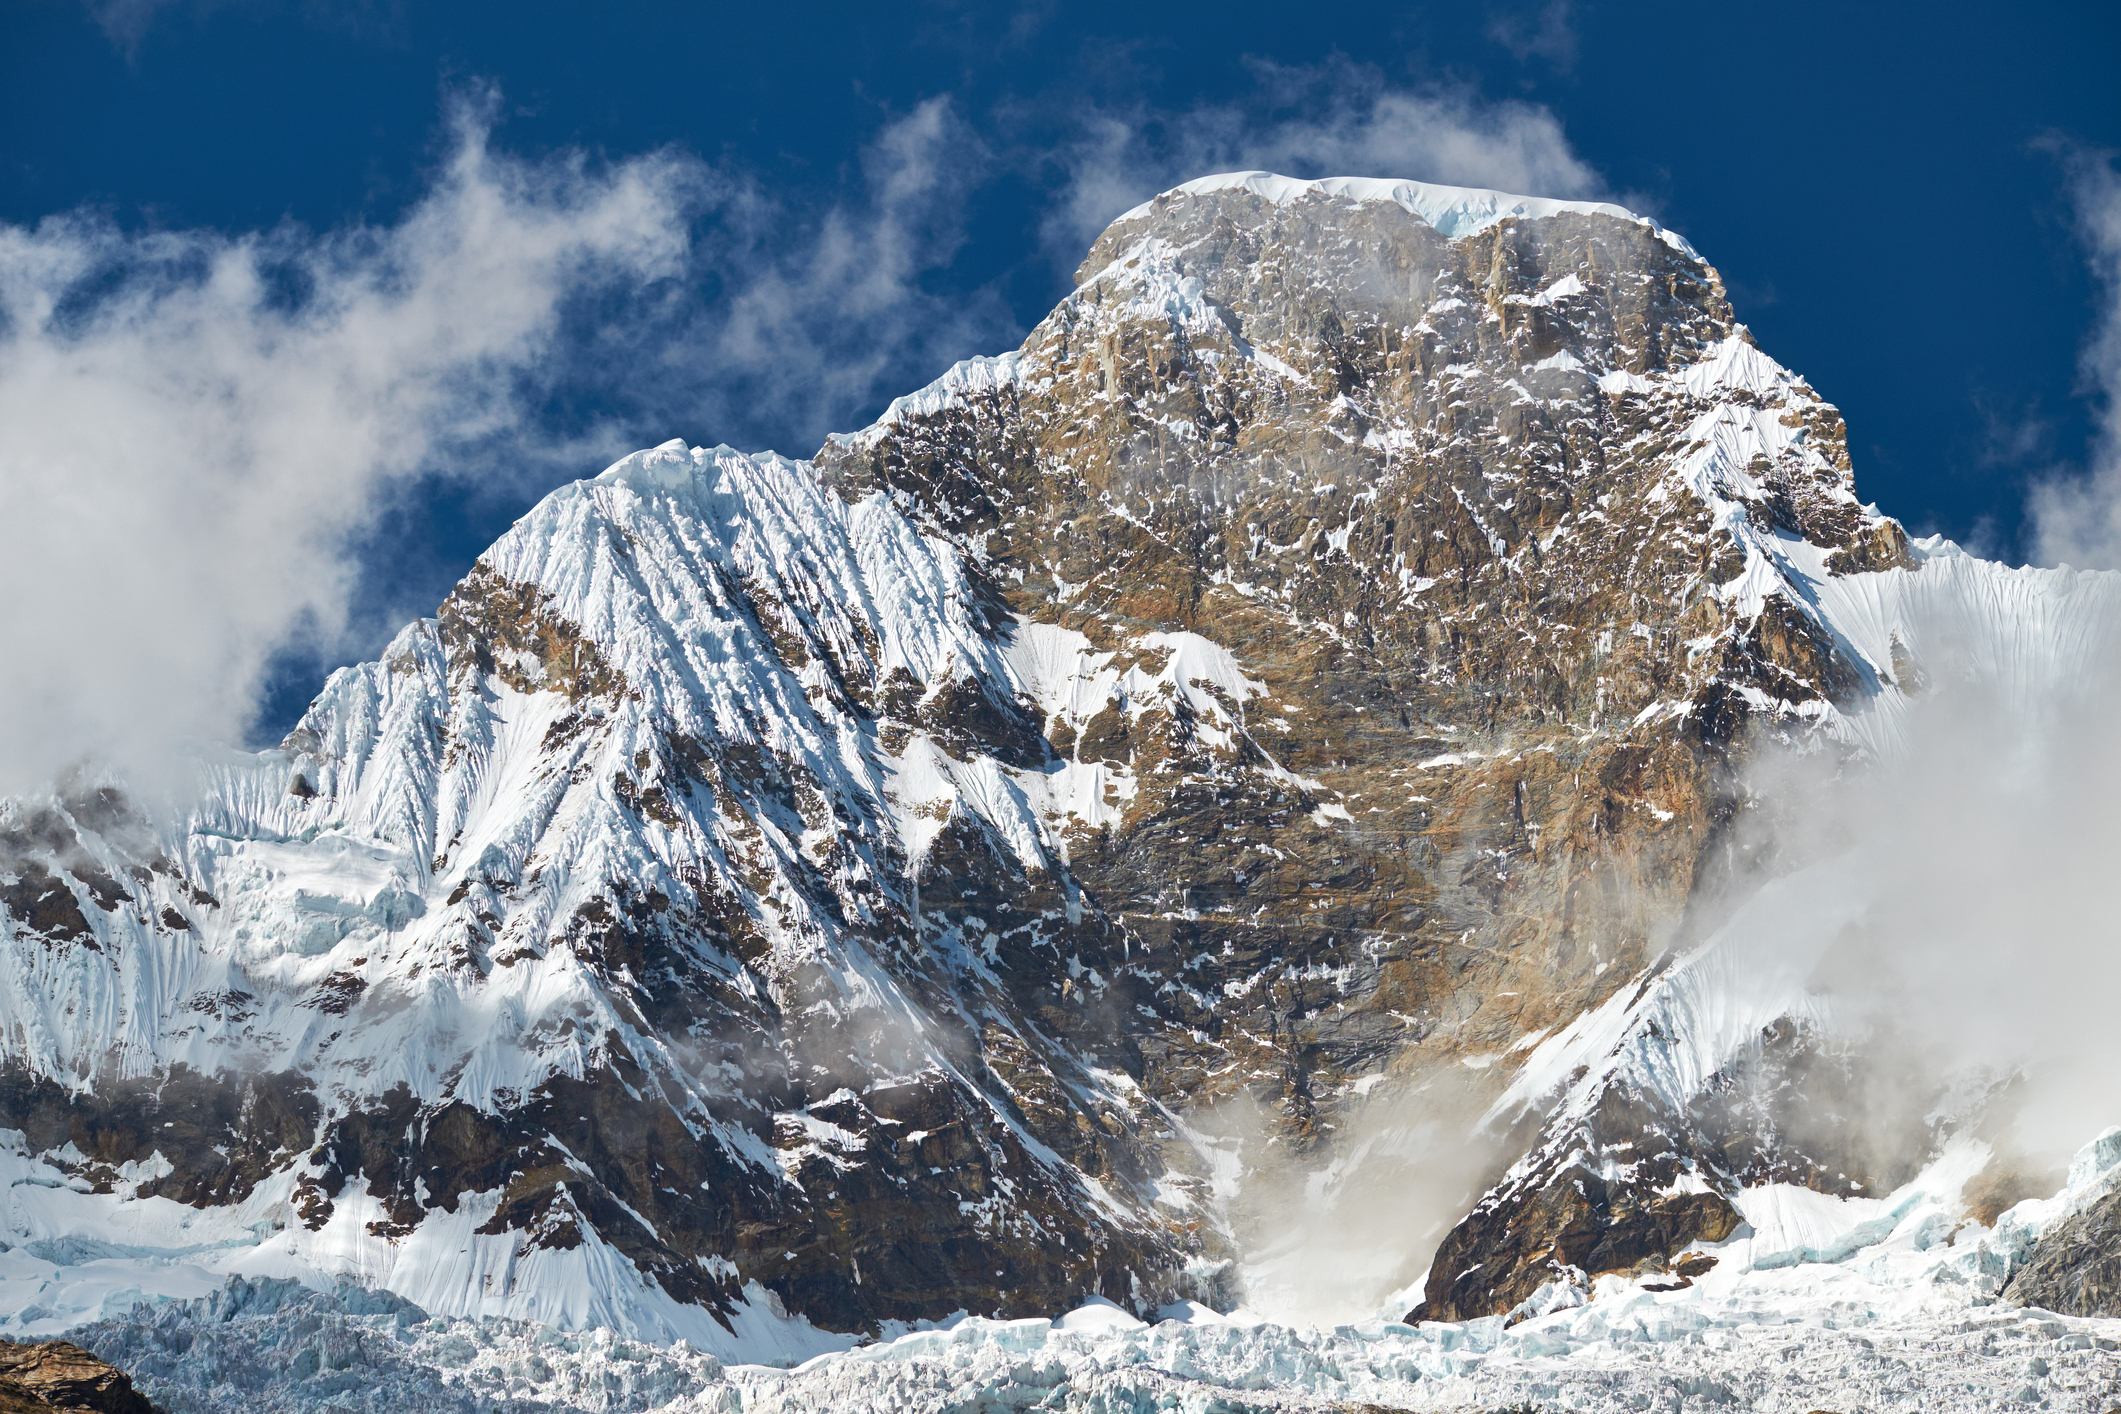 The summit of Huascaran in the Huascarán National Park, Peruvian Andes.